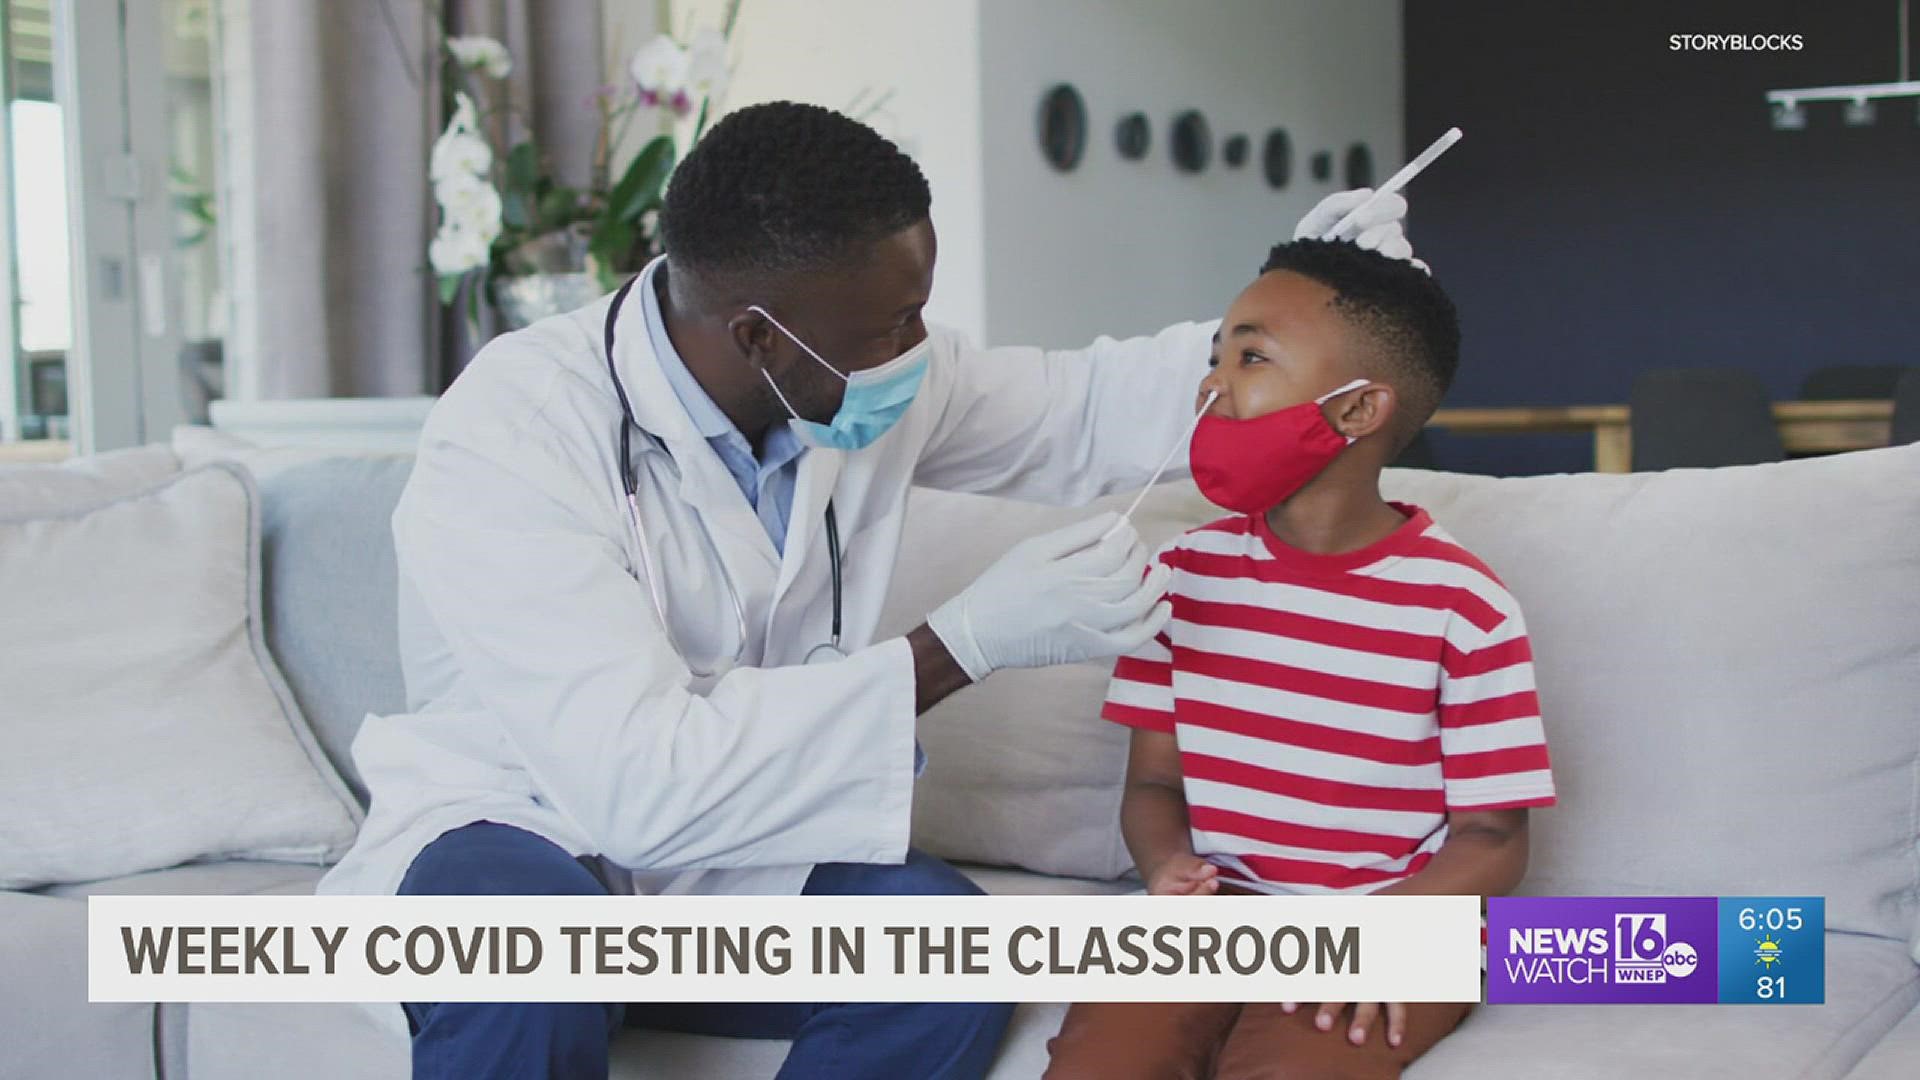 The state has come up with a new program to catch COVID-19 cases in the classroom. School districts can opt into weekly testing for staff and students.